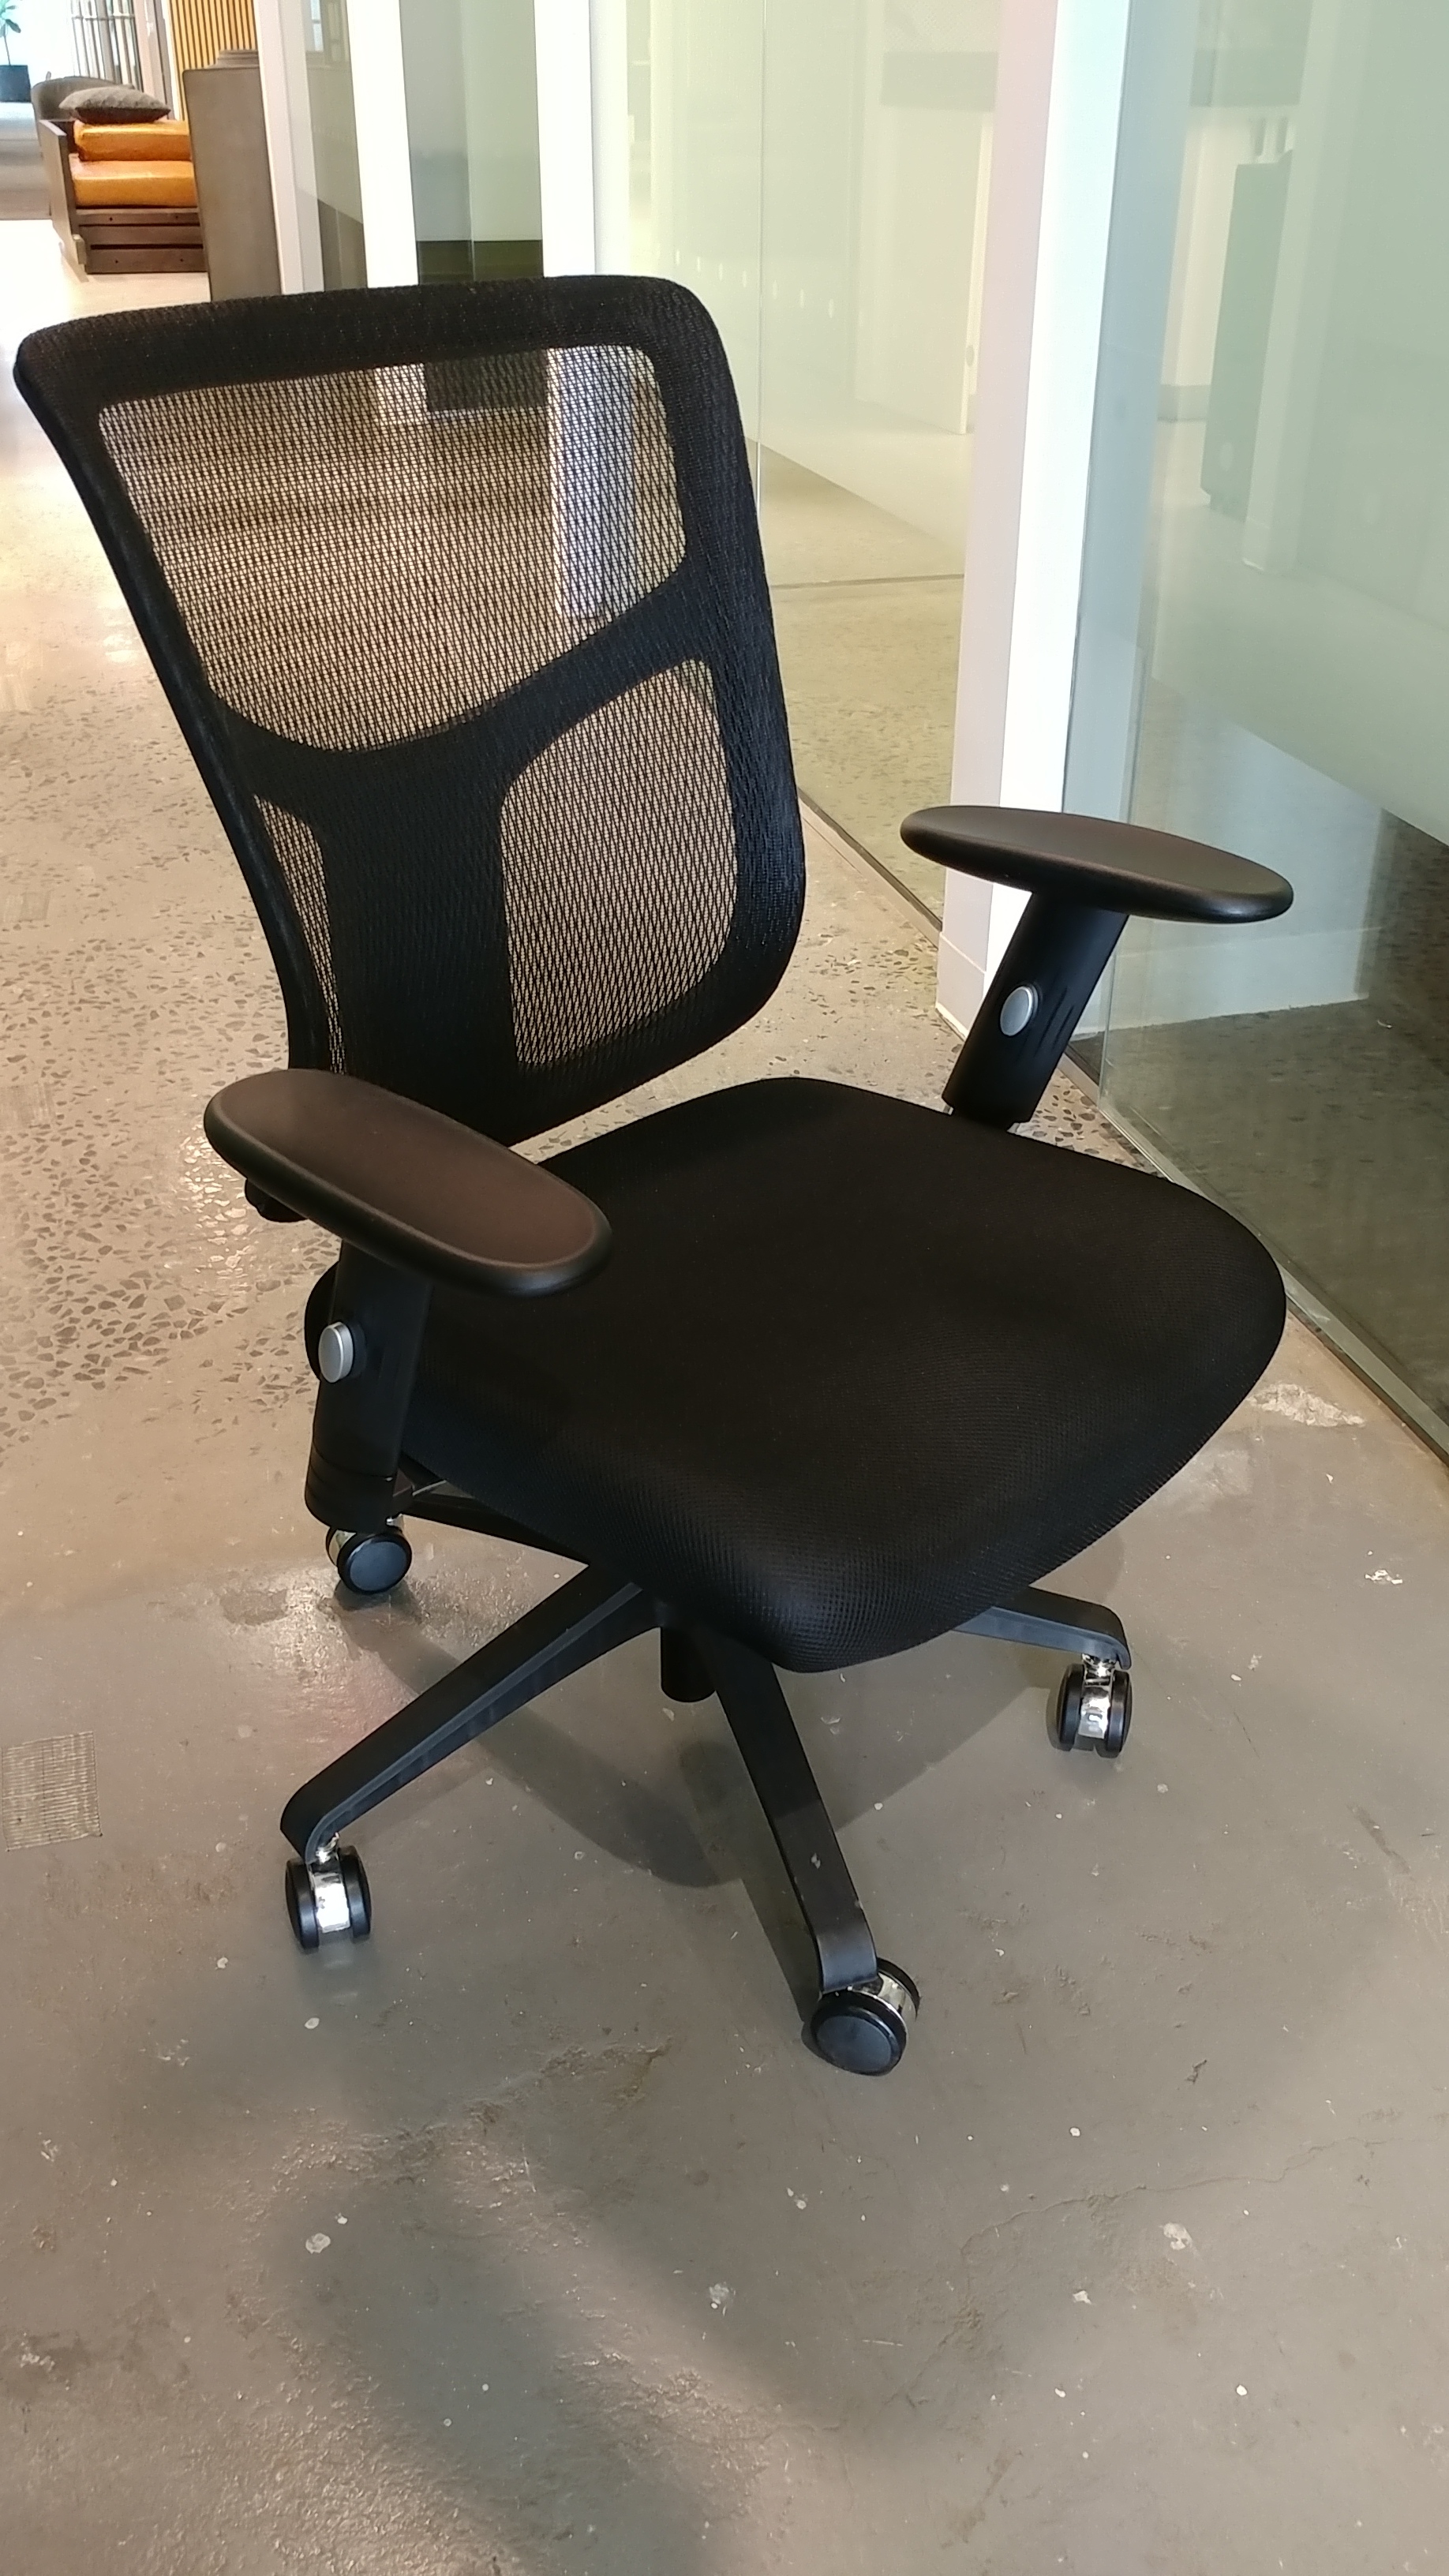 Used Office Chairs For Sale - Desk Mesh Chairs - Used Office Furniture